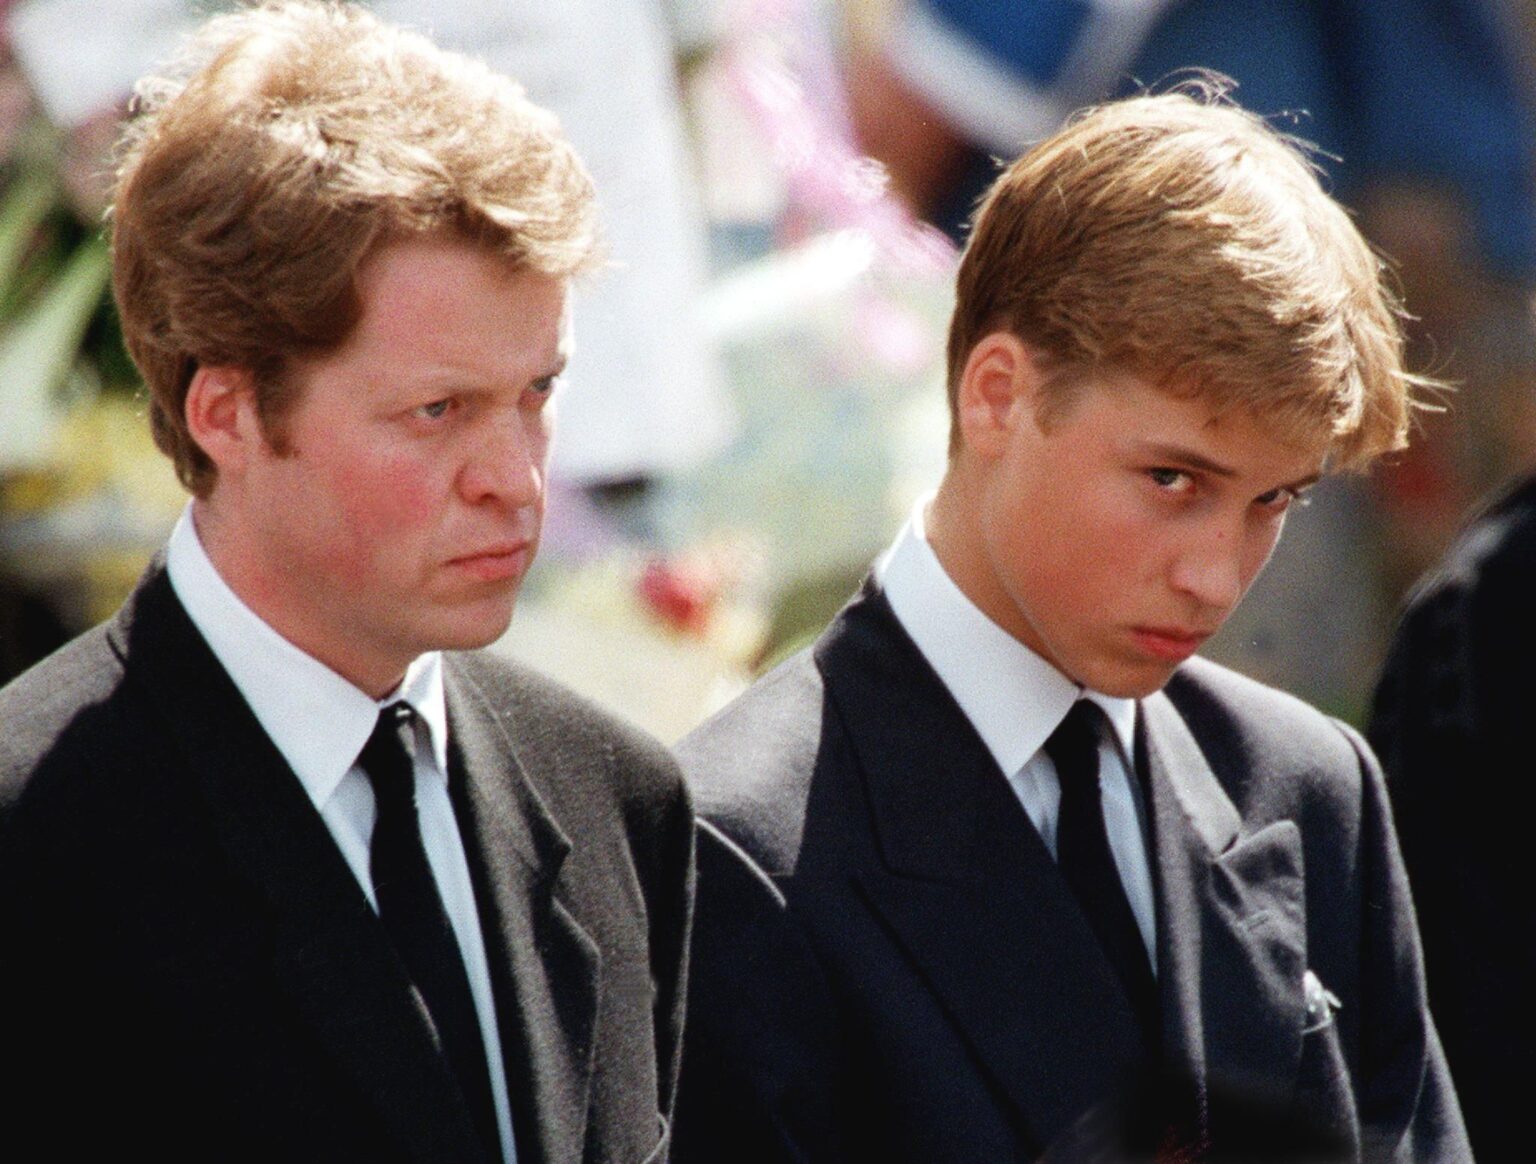 Queen procession brought back memories of Diana’s funeral – William